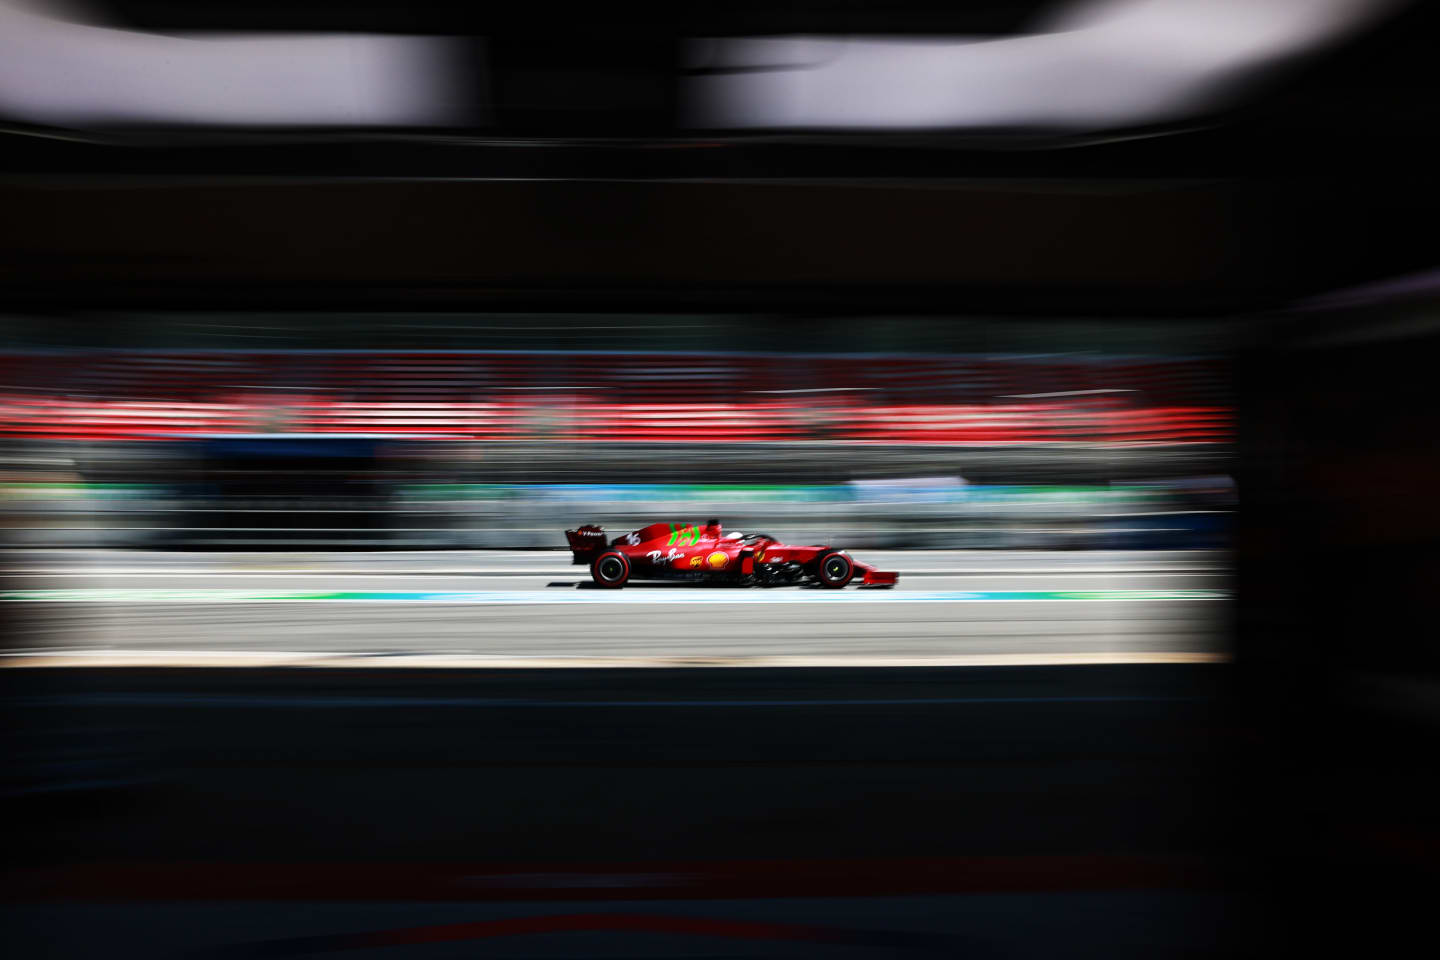 BARCELONA, SPAIN - MAY 08: Charles Leclerc of Monaco driving the (16) Scuderia Ferrari SF21 in the Pitlane during qualifying for the F1 Grand Prix of Spain at Circuit de Barcelona-Catalunya on May 08, 2021 in Barcelona, Spain. (Photo by Mark Thompson/Getty Images)